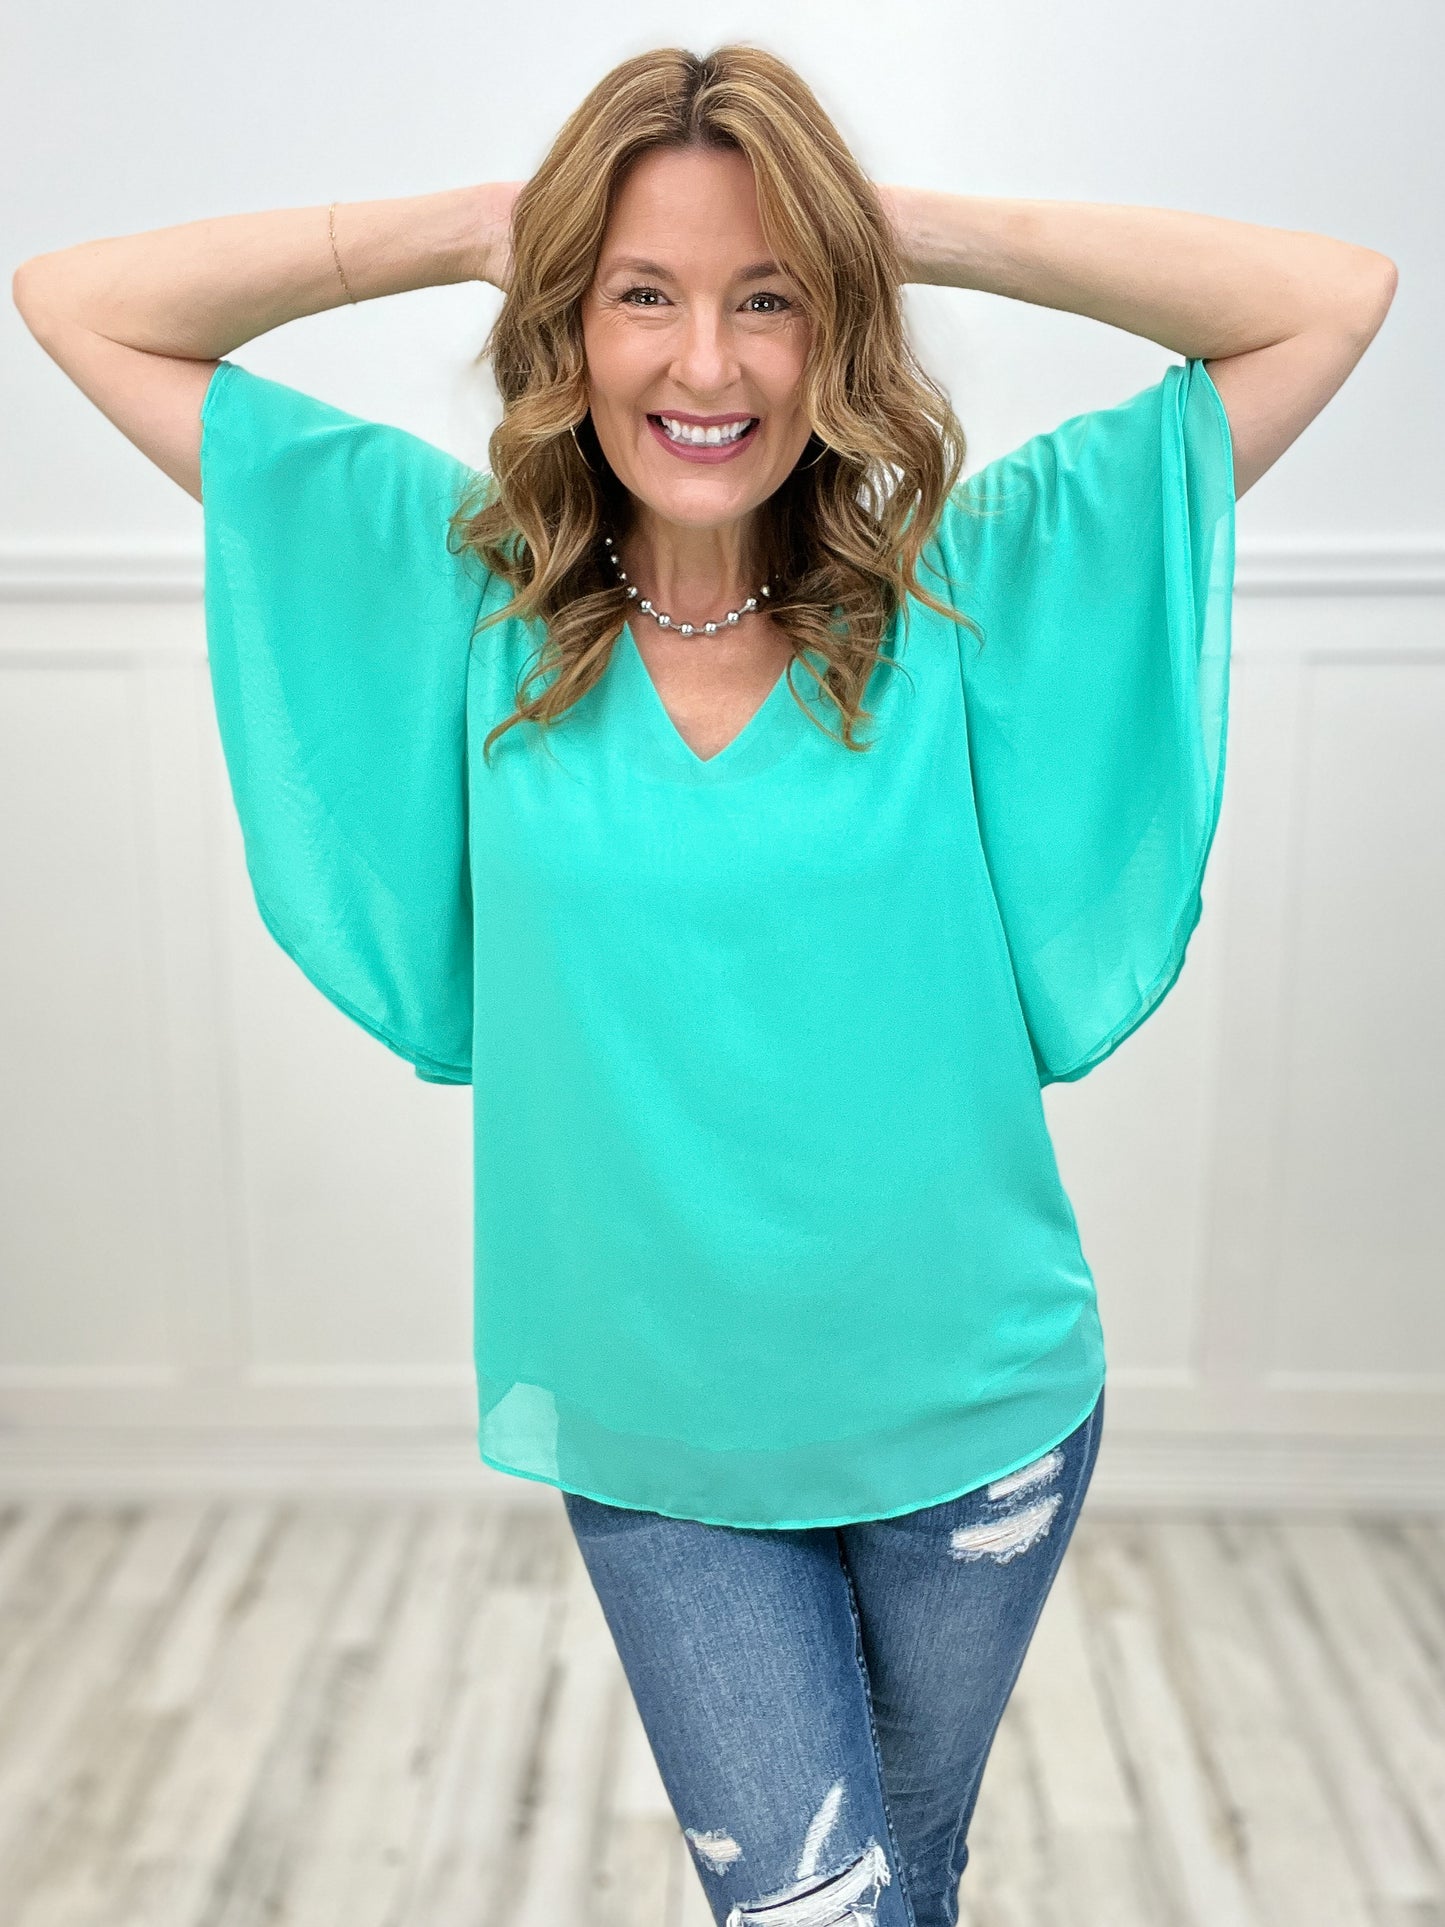 Happiest with You Chiffon Top